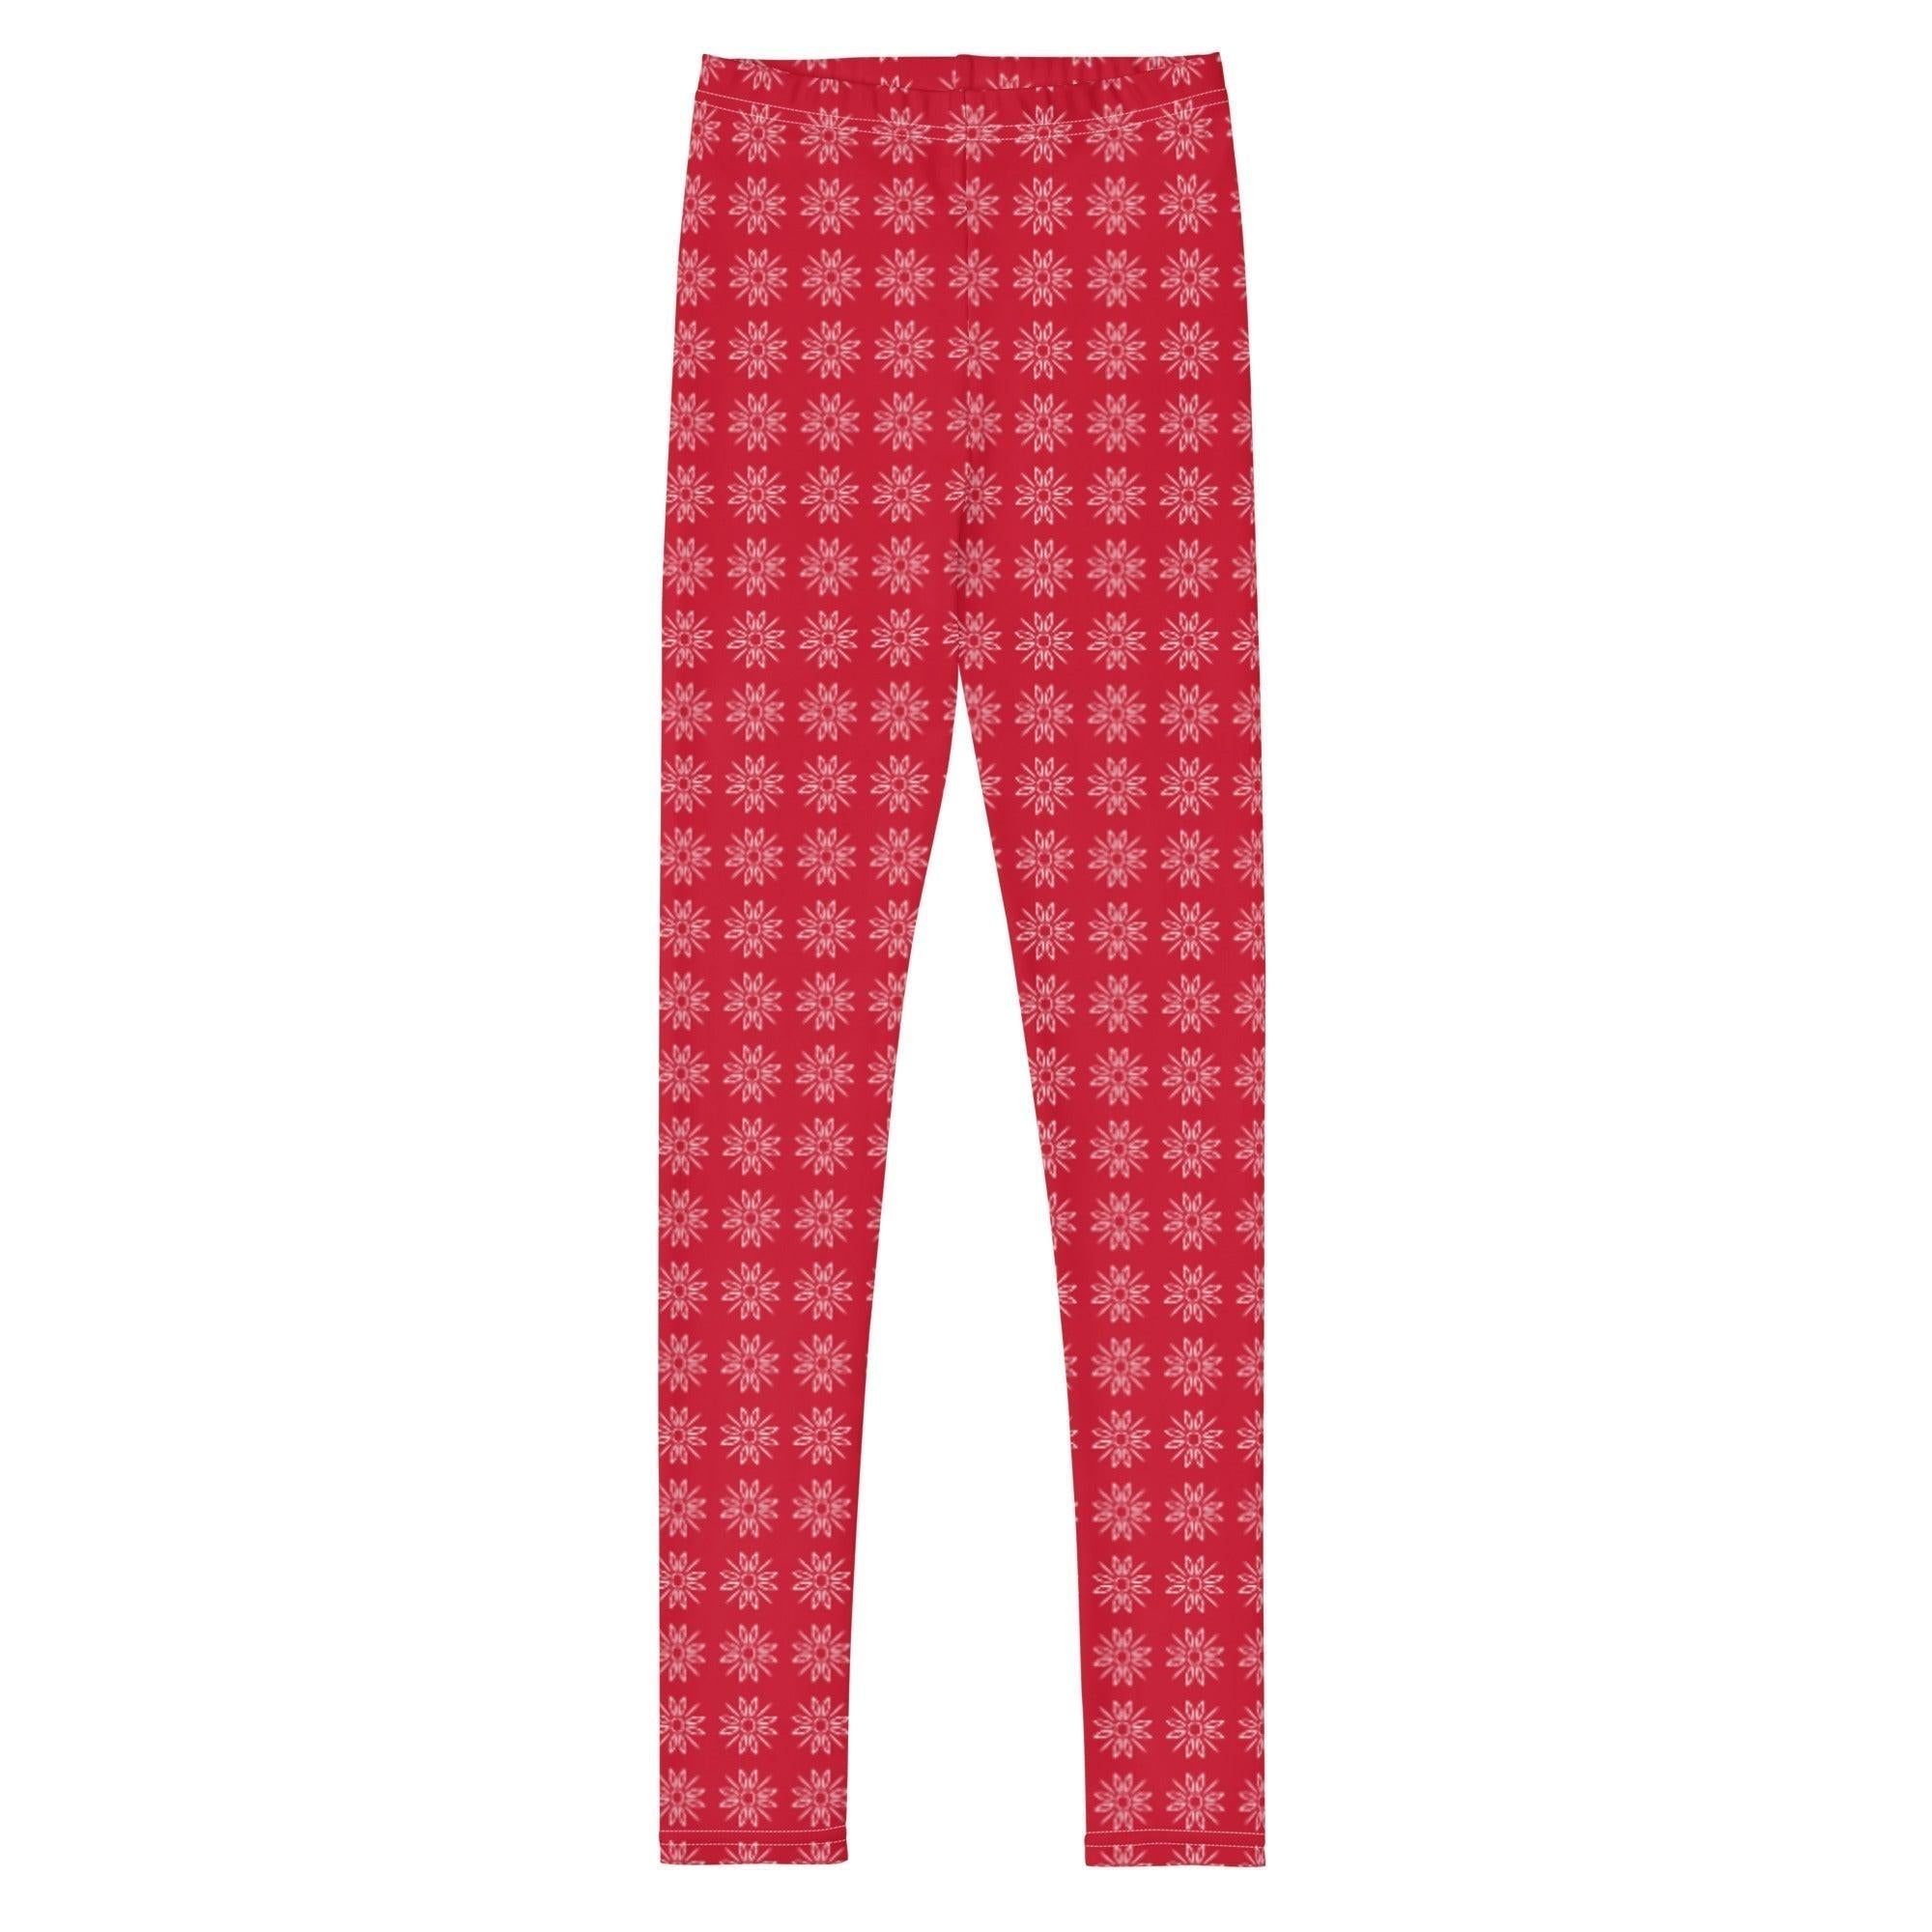 Red Sparkle Leggings (Baby + Youth) - Sun-Kissed & Sandy